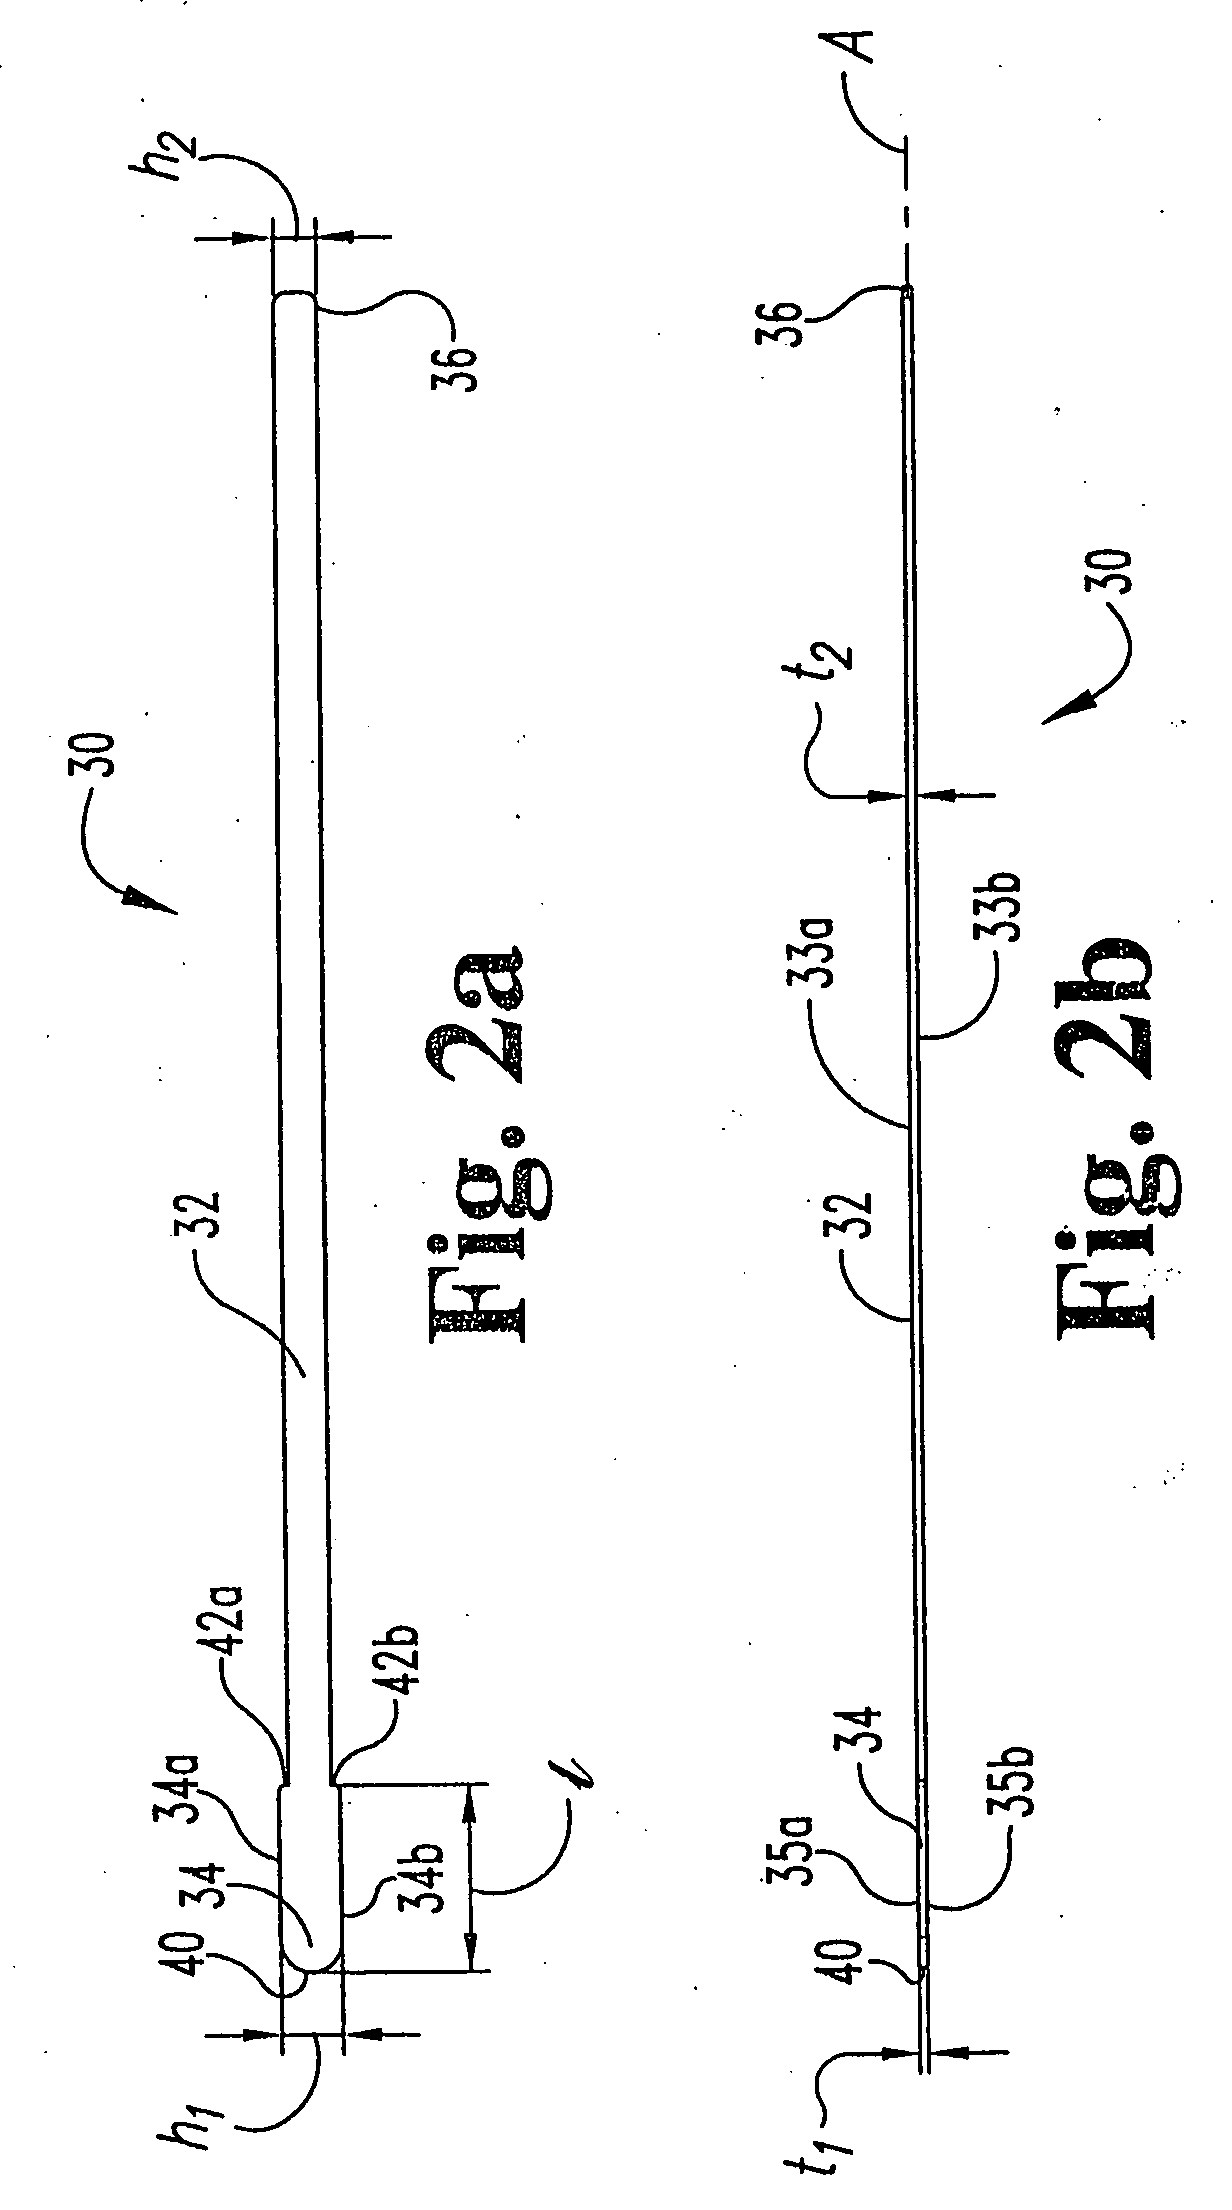 Methods and instrumentation for distraction of a disc space